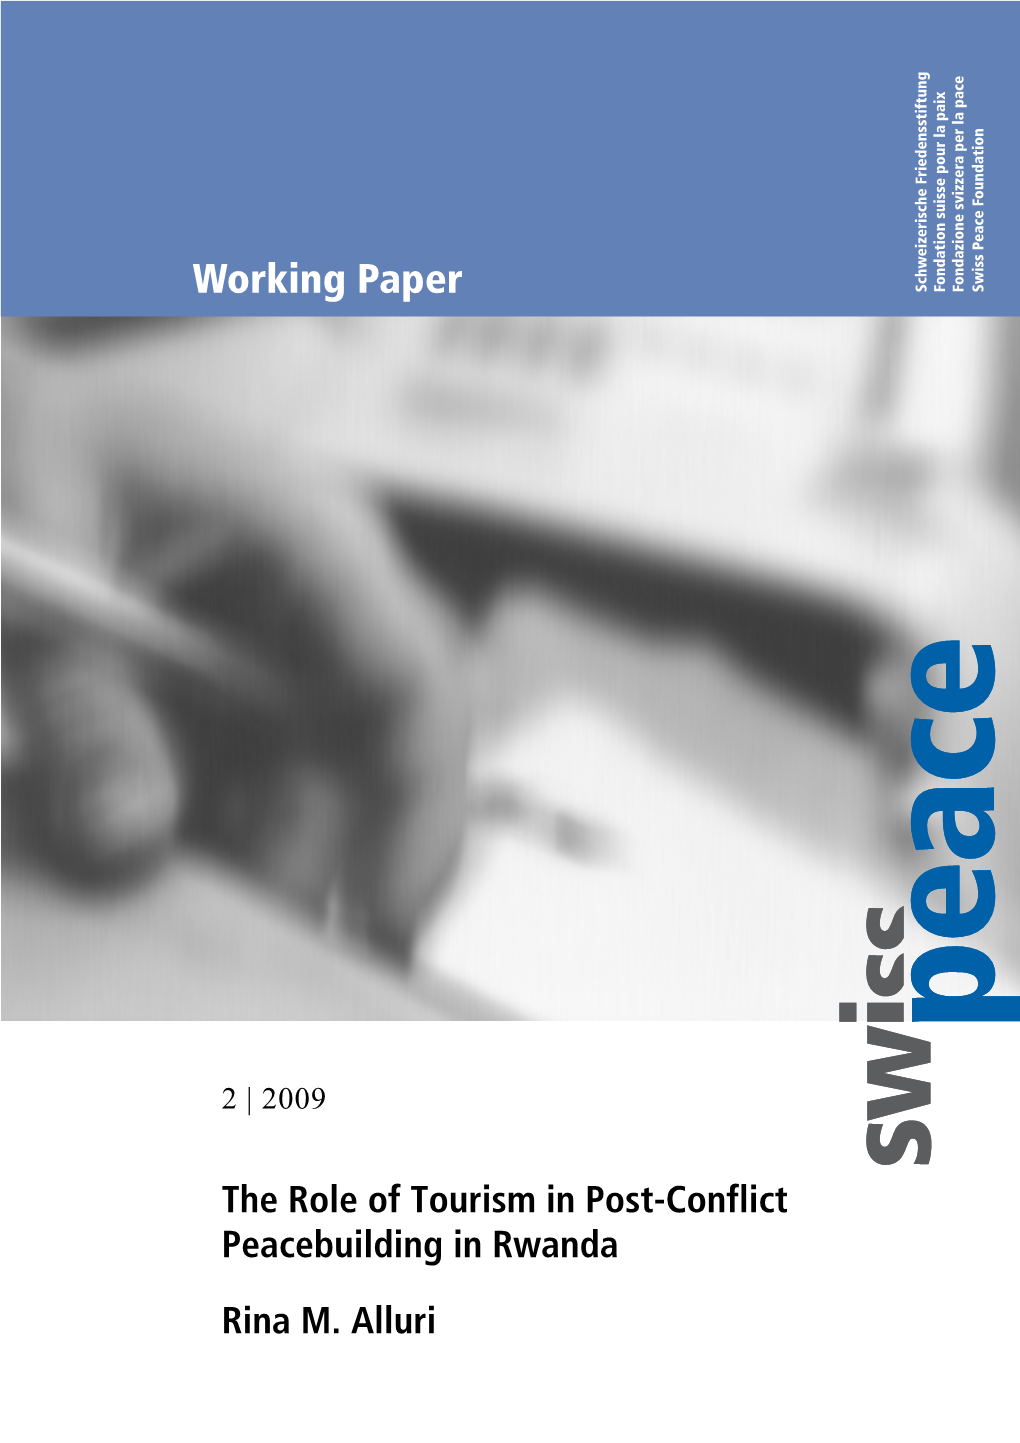 The Role of Tourism in Post-Conflict Peacebuilding in Rwanda